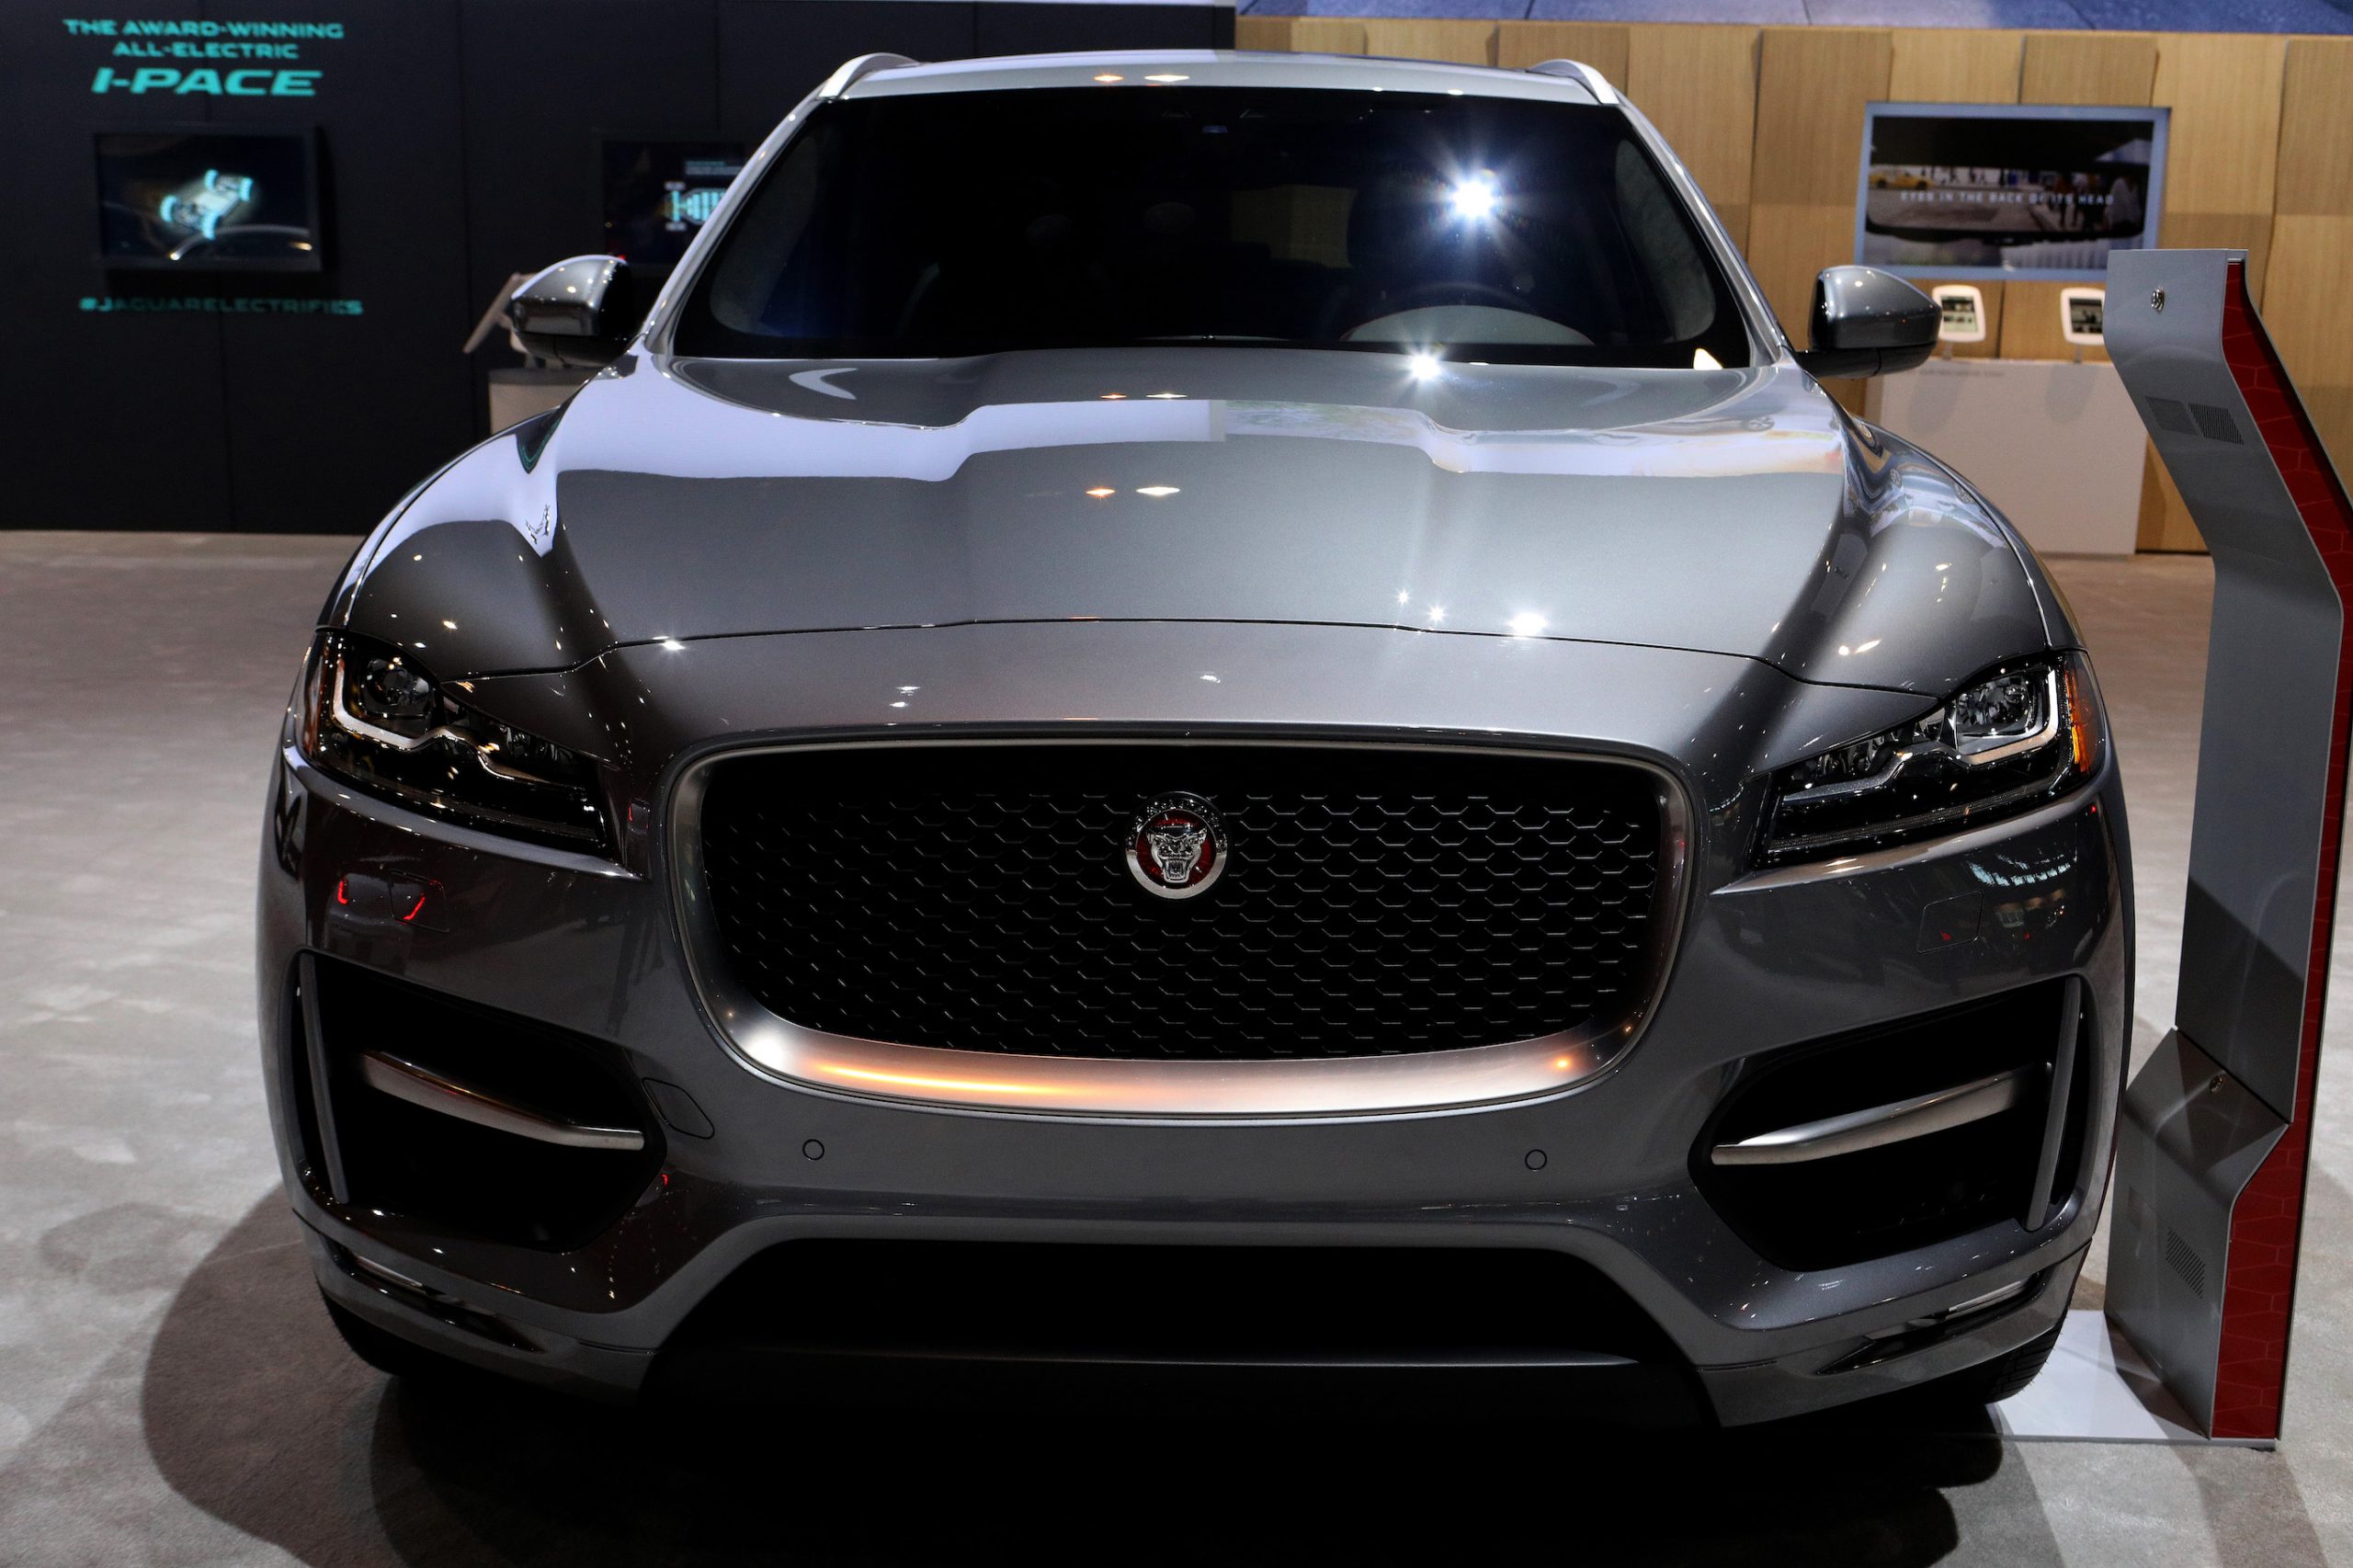 Gray 2020 Jaguar F-Pace is on display at the 112th Annual Chicago Auto Show